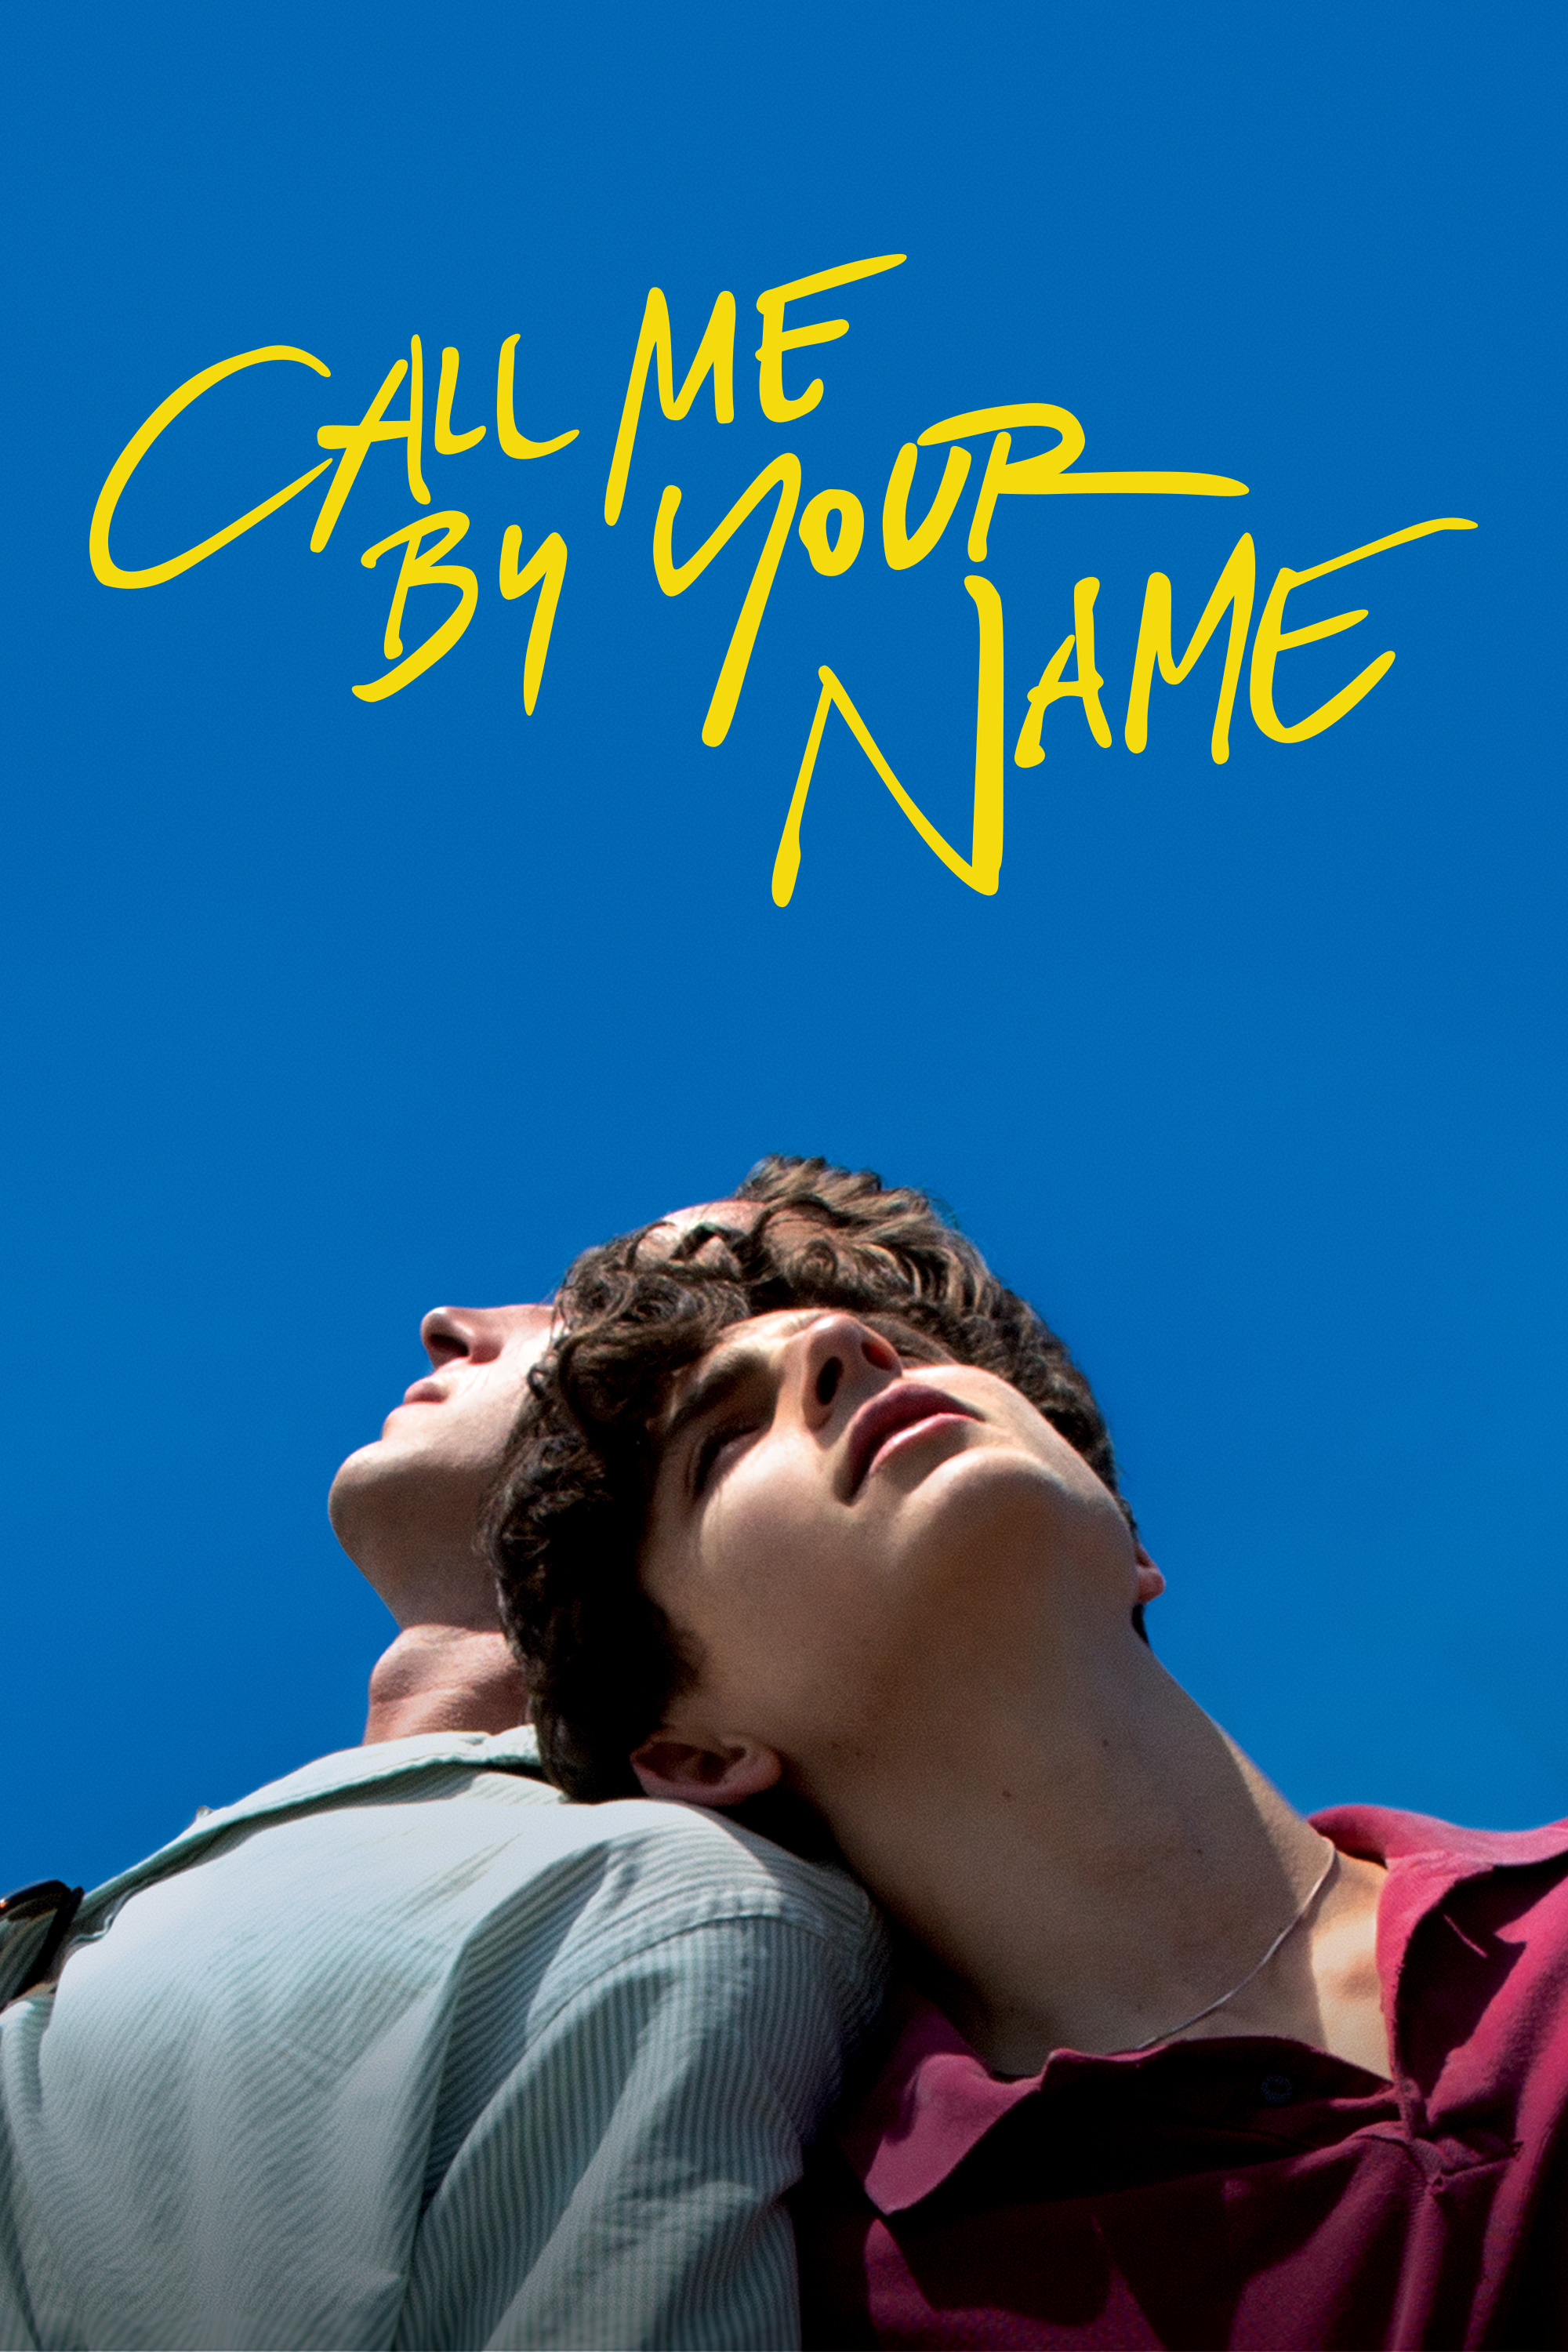 Where to watch 'Call Me by Your Name (2017)' on Netflix